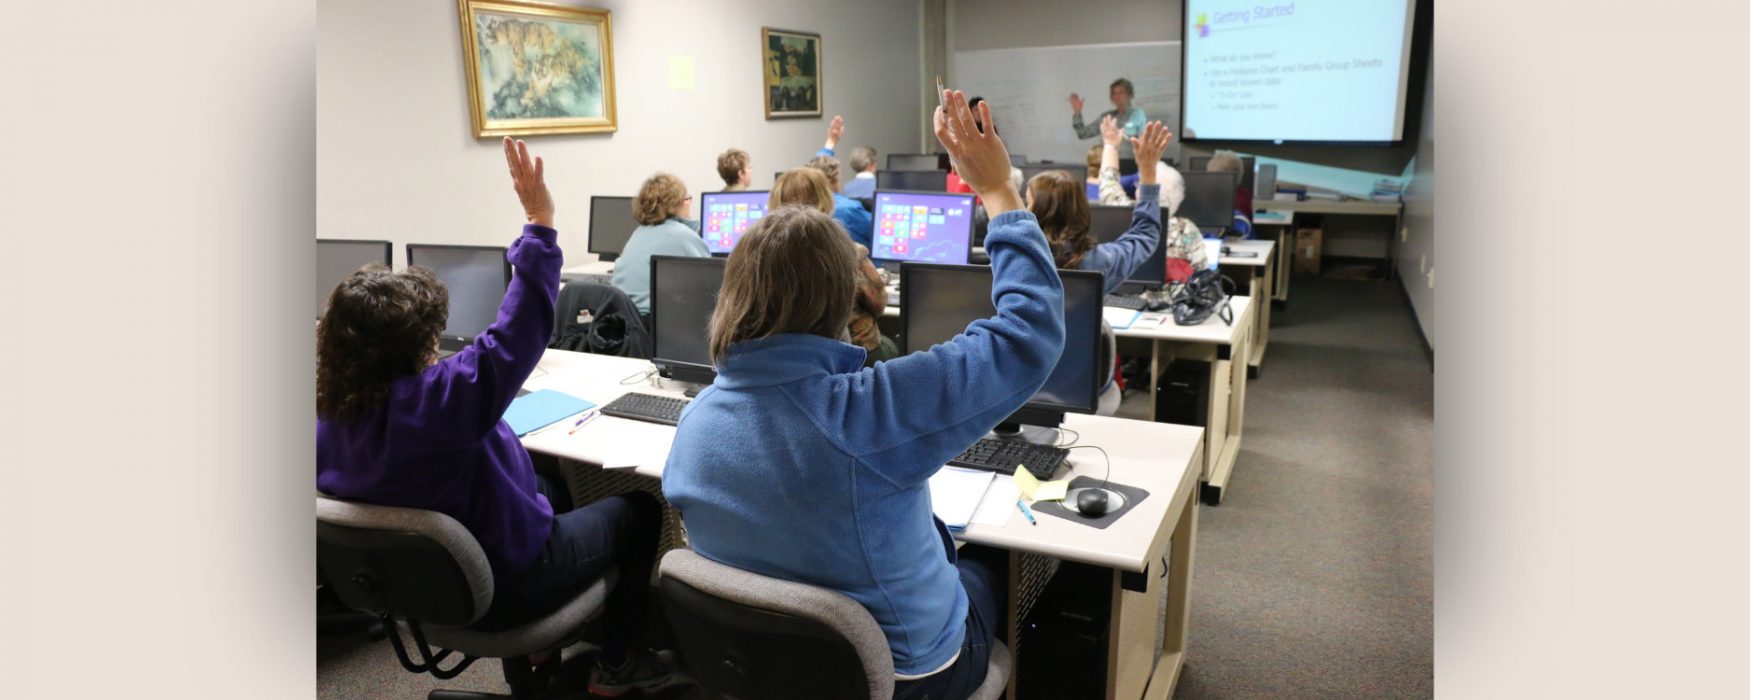 Group of people raising their hands during a training analysis